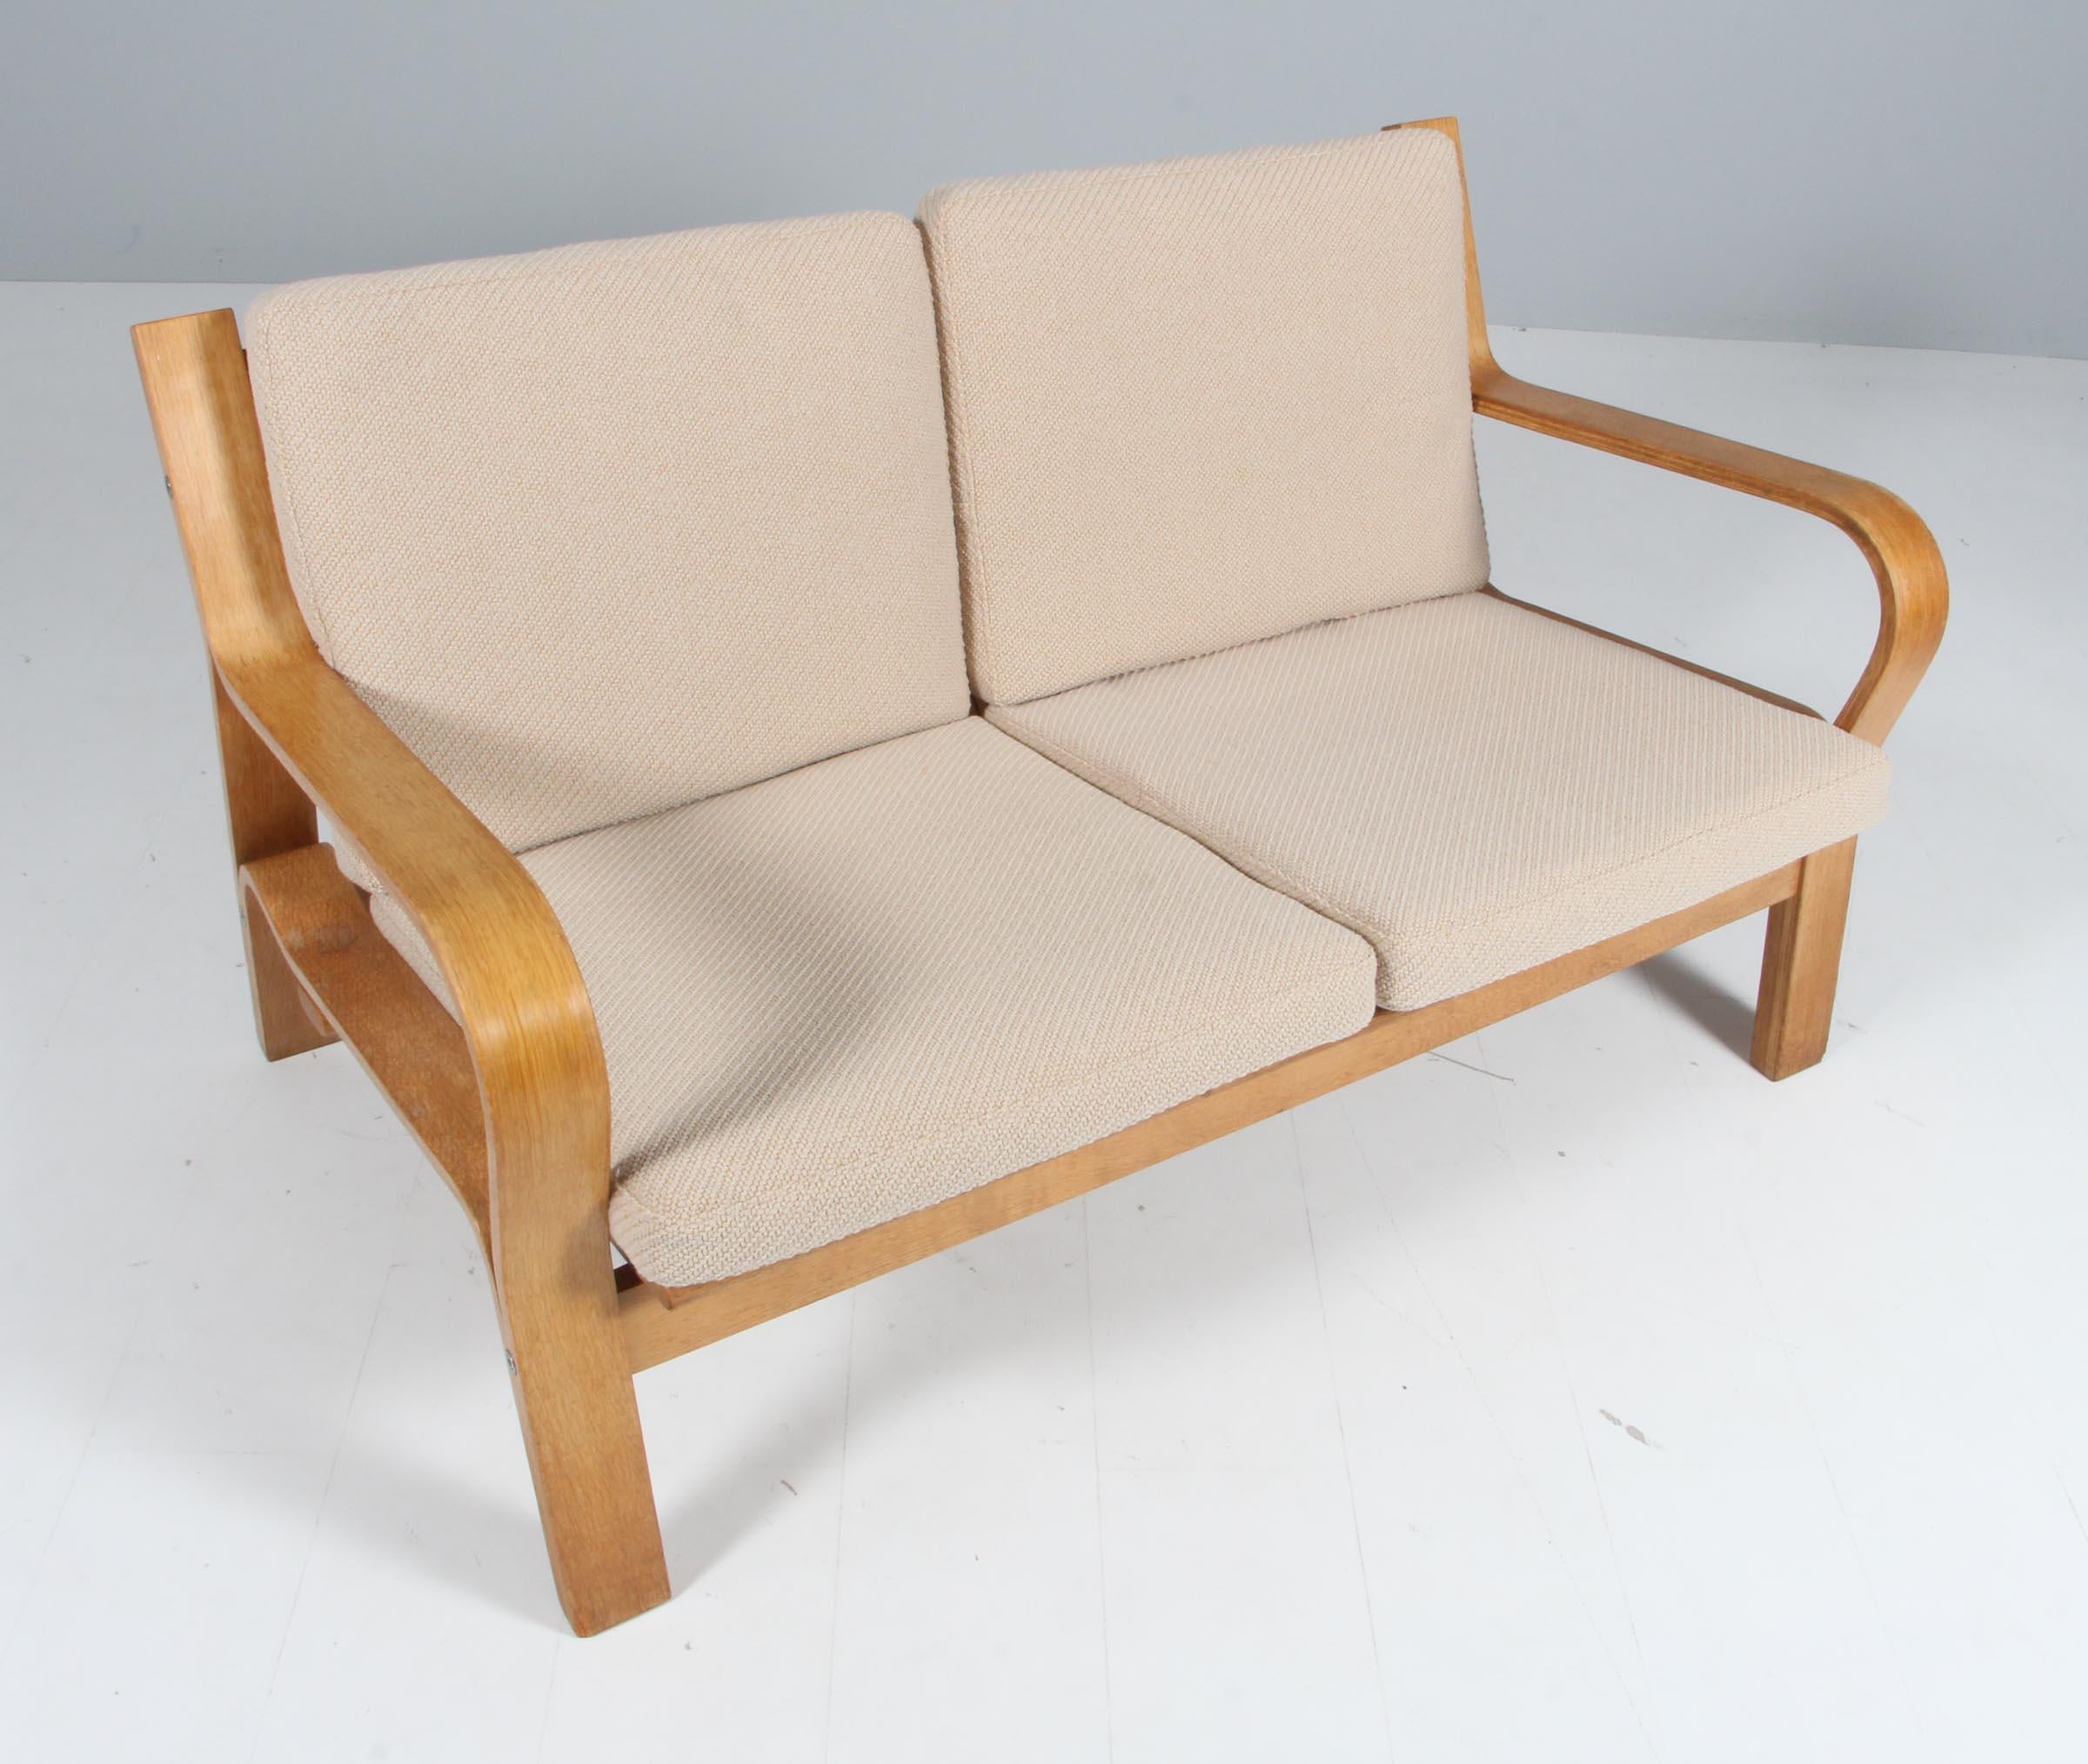 Hans J. Wegner two seat sofa made bended oak veener. Cotton cord in back

New upholstered with Coda 2 fabric for kvadrat

Model 671, made by GETAMA.

 